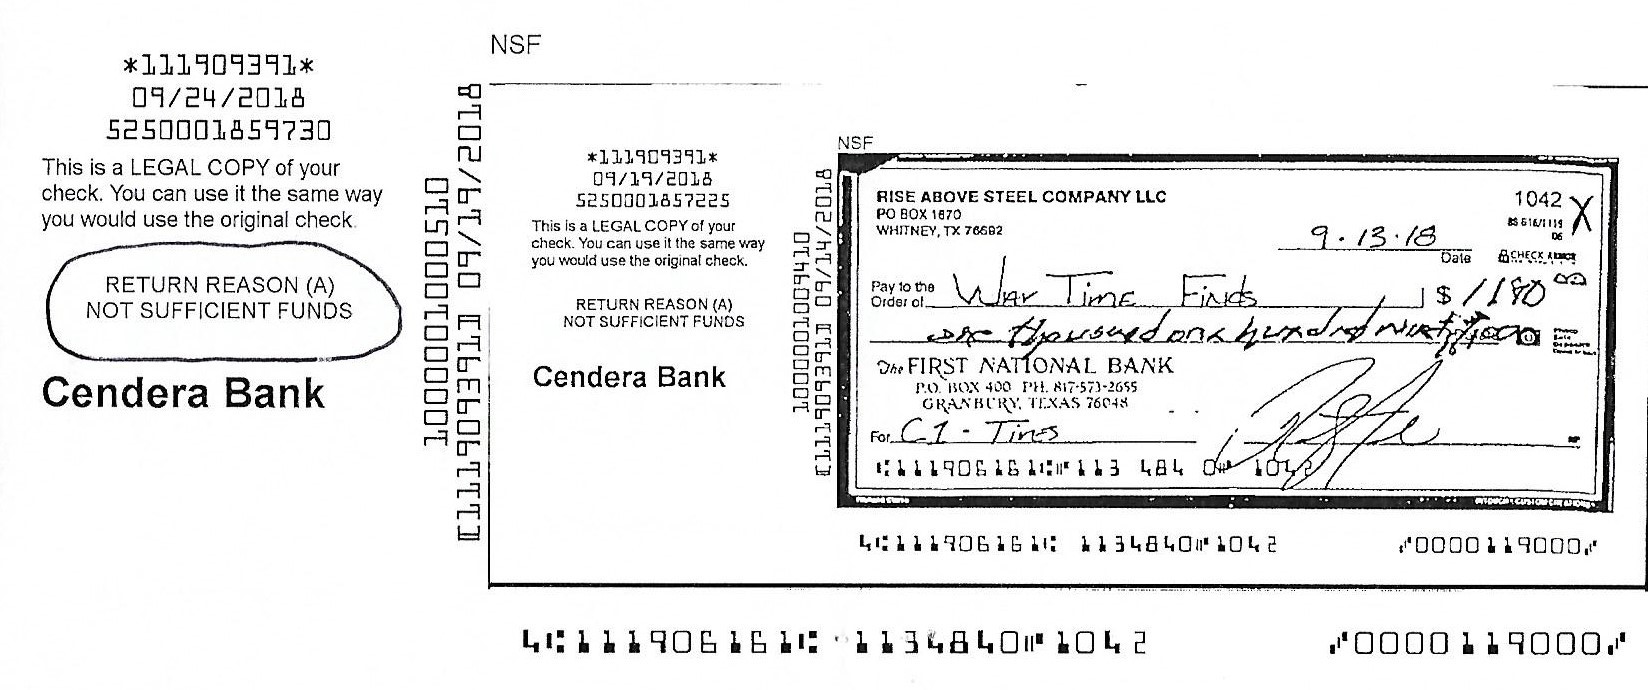 The issued NSF check